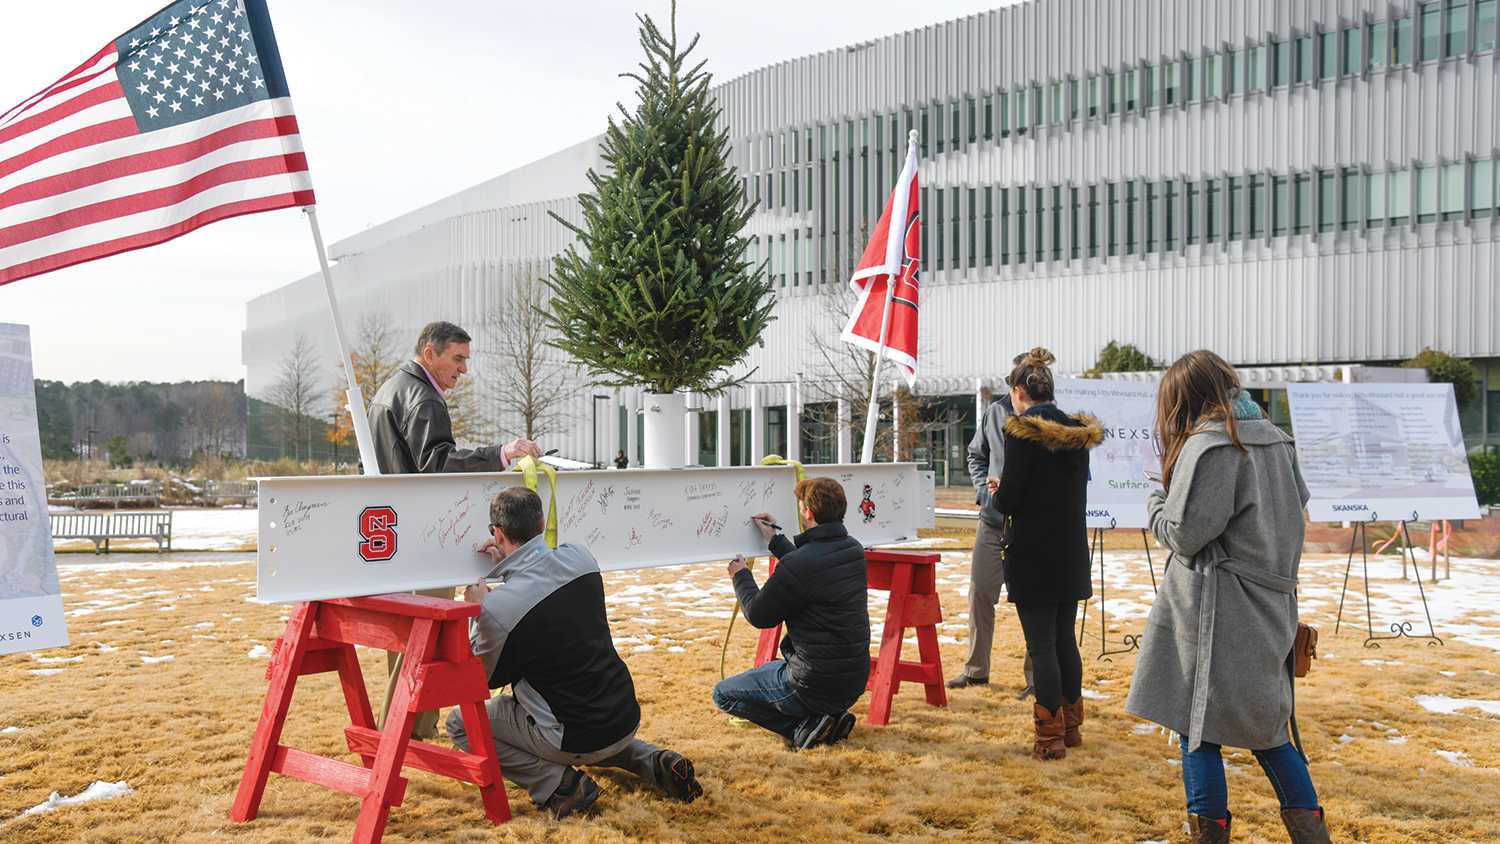 At the Topping Off Celebration, the high beam, which sits at the top of an elevator shaft in the building, was painted white. It was placed on two NC State red saddle horses on the morning of the 12th, and workers and NC State students, faculty and administrators were invited to sign it.